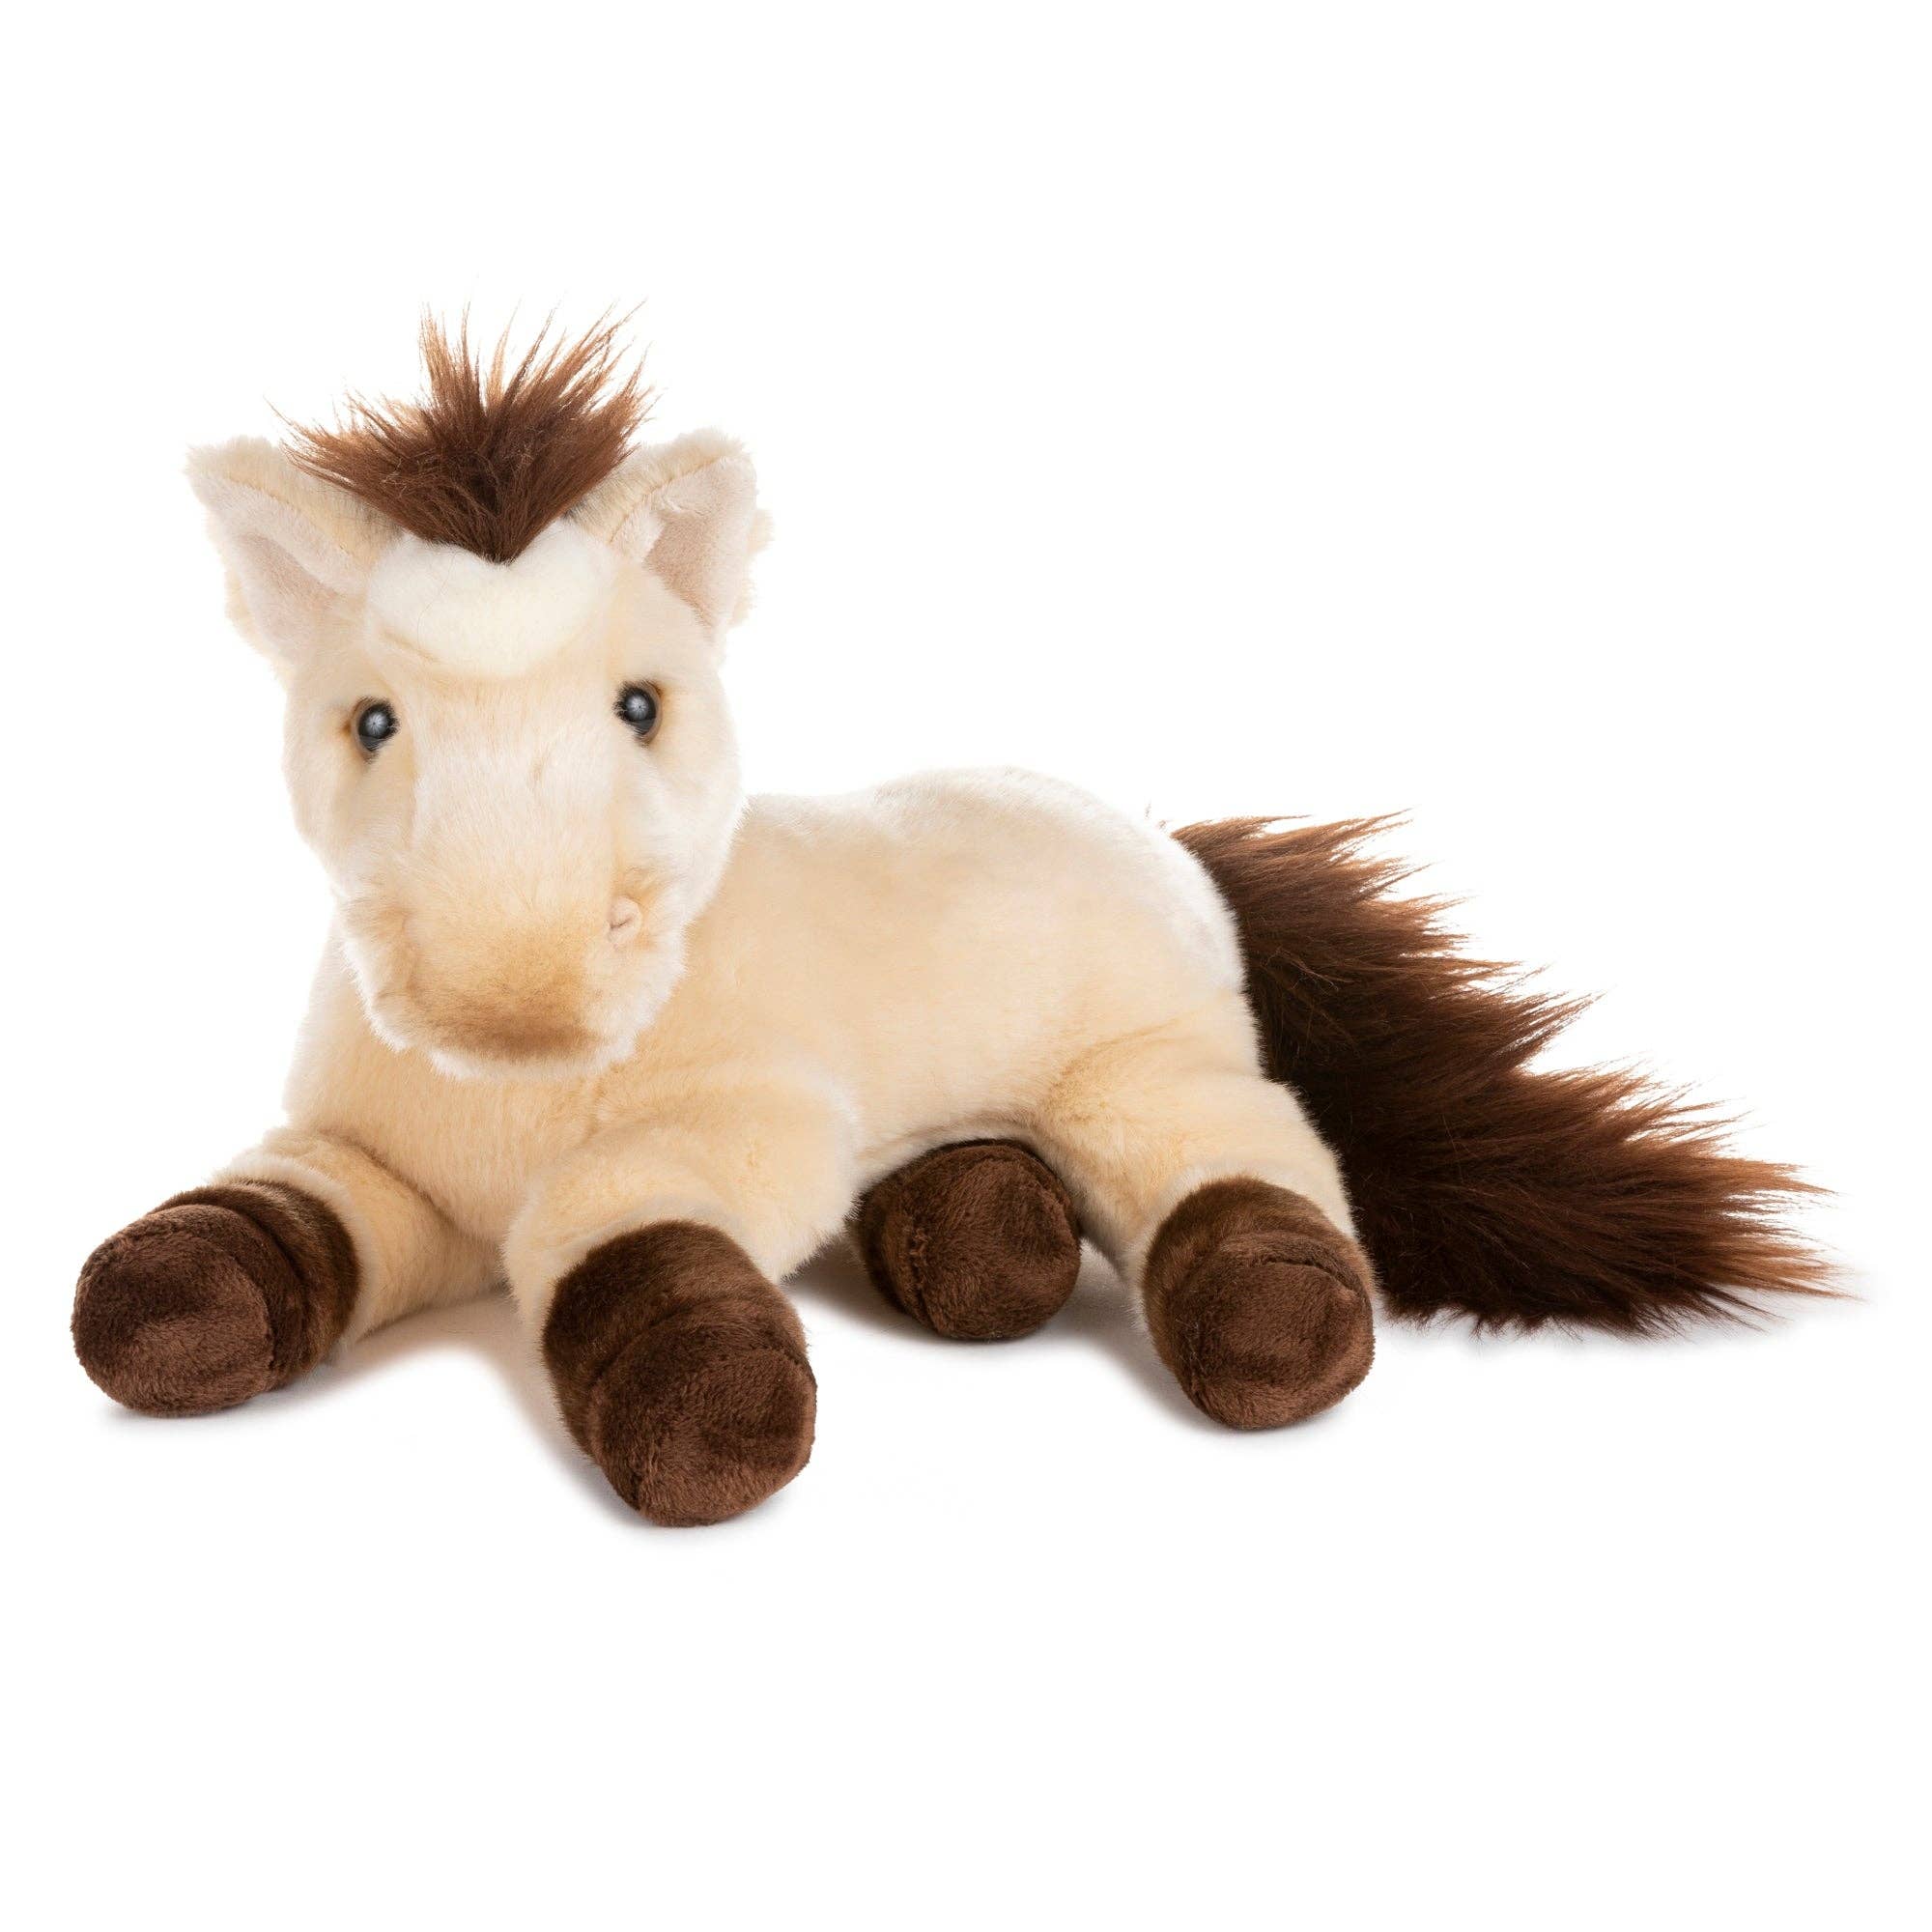 Dunn Color Plush Horse Toy 12" by Wildlife Tree